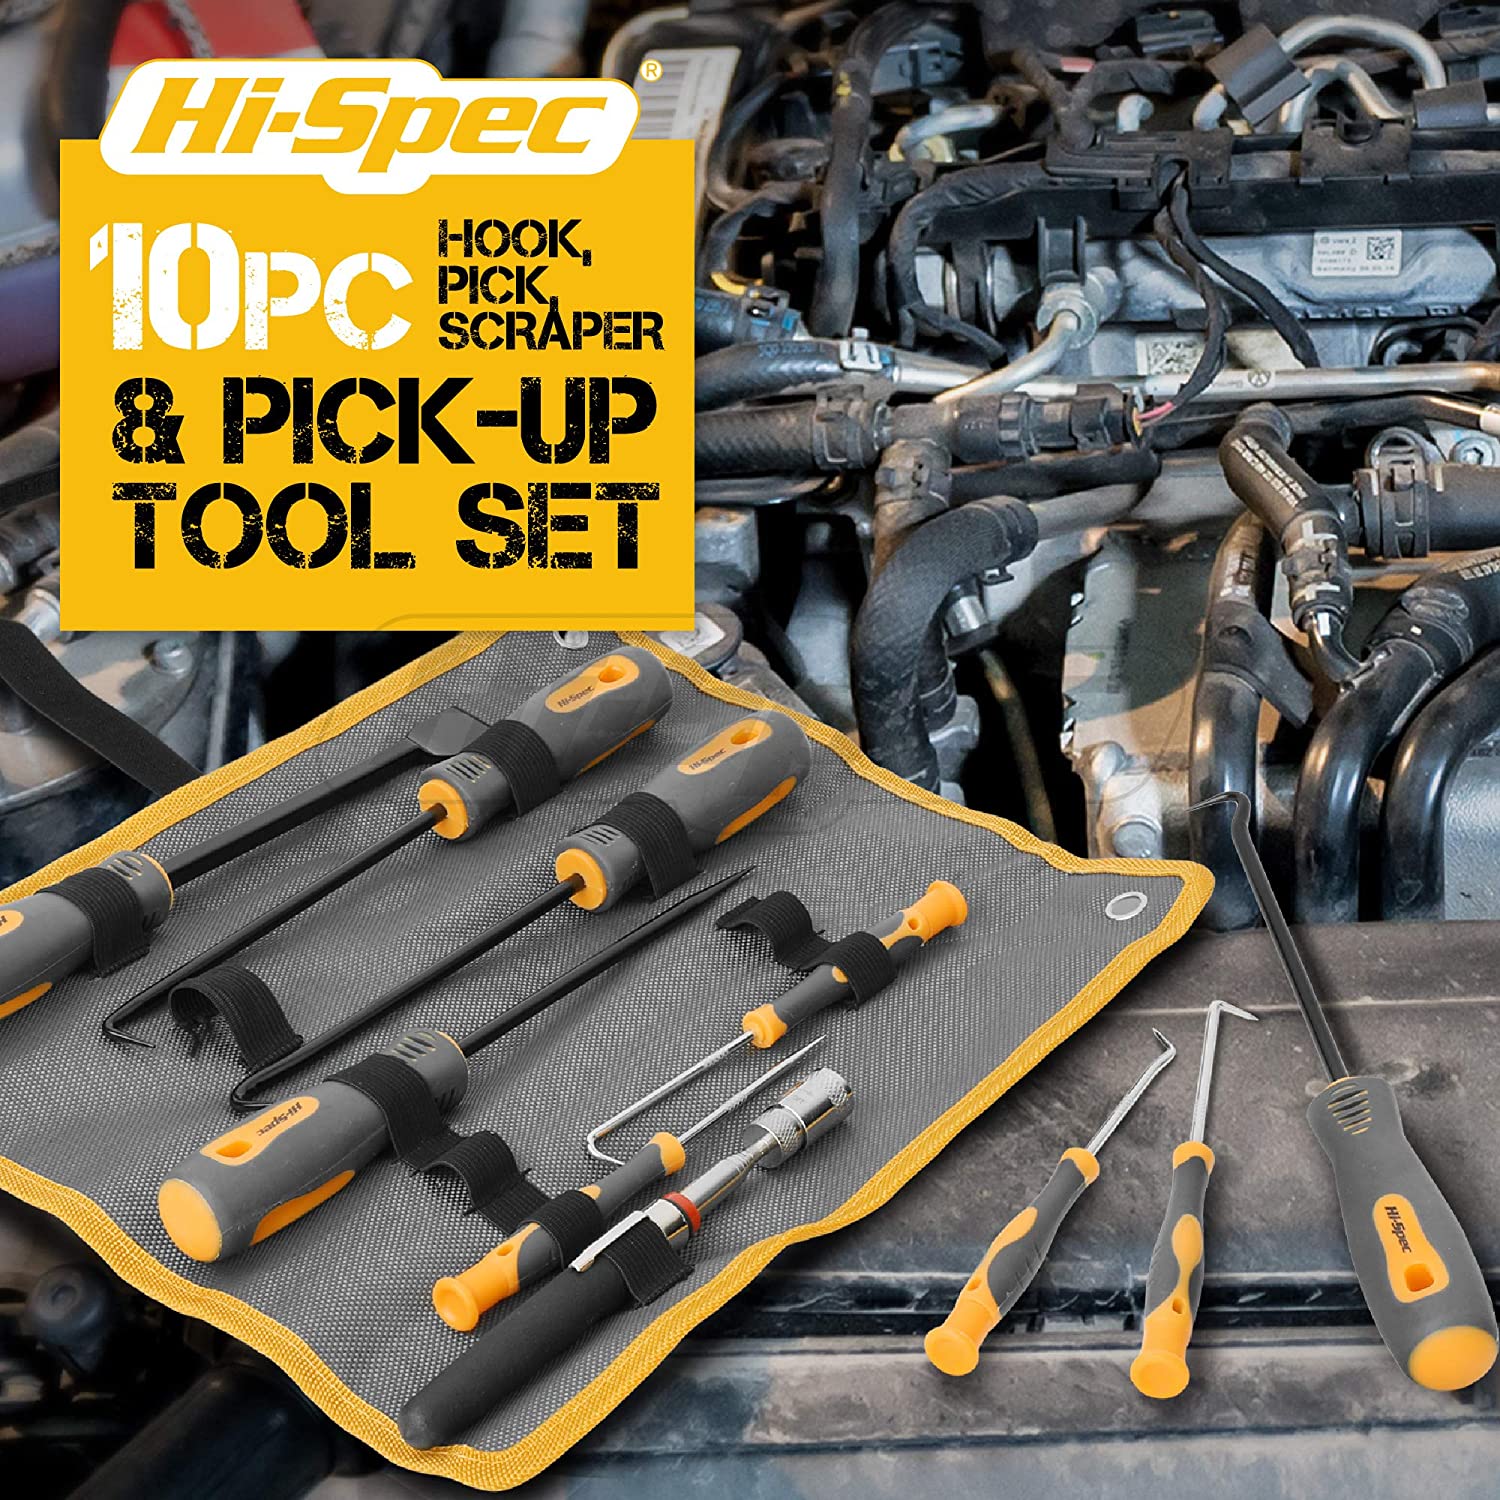 ValueMax 10-Piece Precision Hook and Pick Set with Scraper